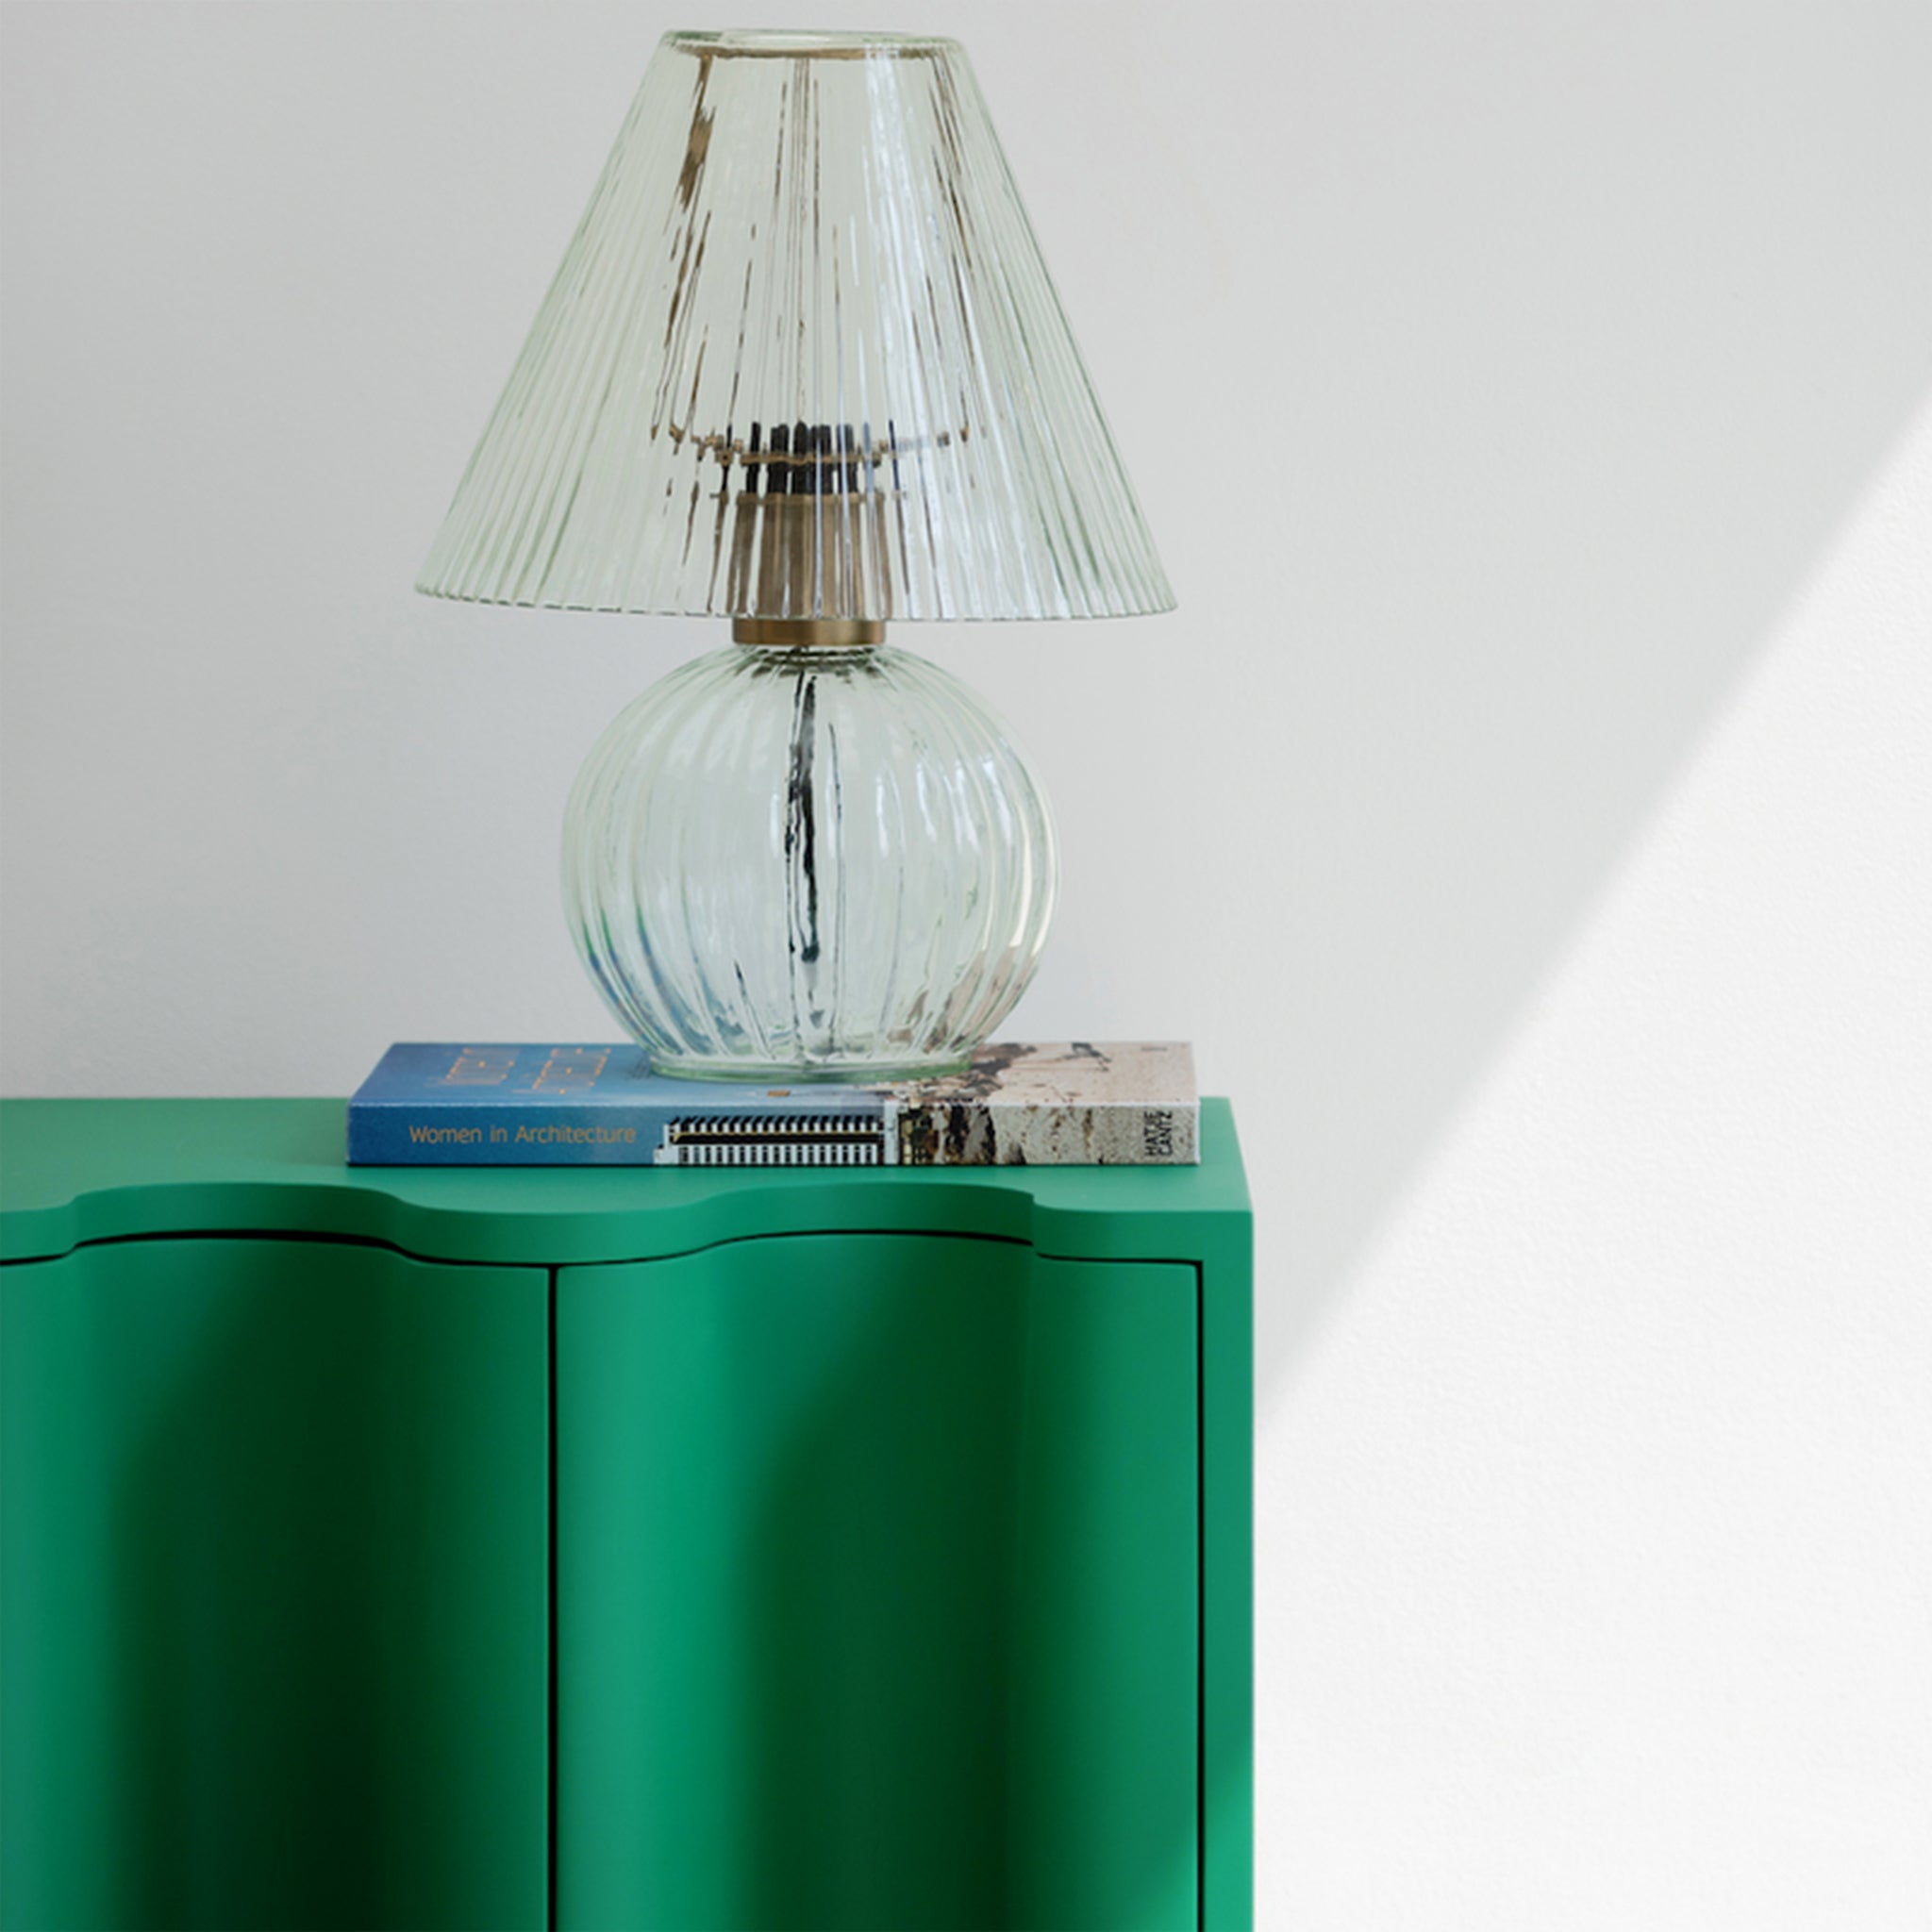 Close-up of a green bedside table with a wavy front design, featuring a clear glass table lamp and a stack of books on top, set against a white wall.